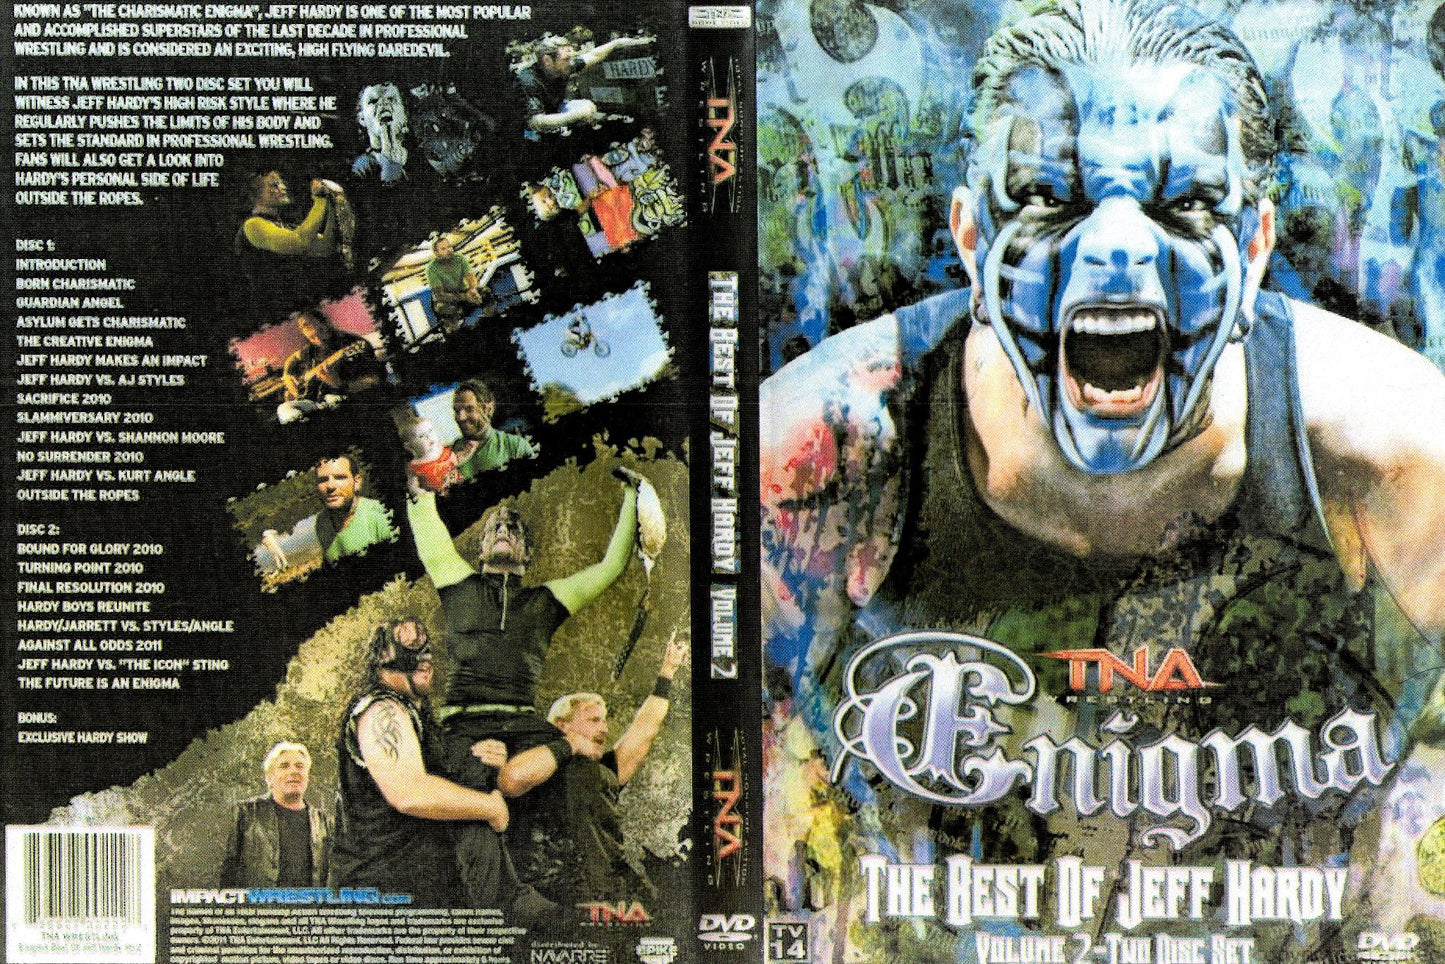 enigma the best of jeff hardy volume 2